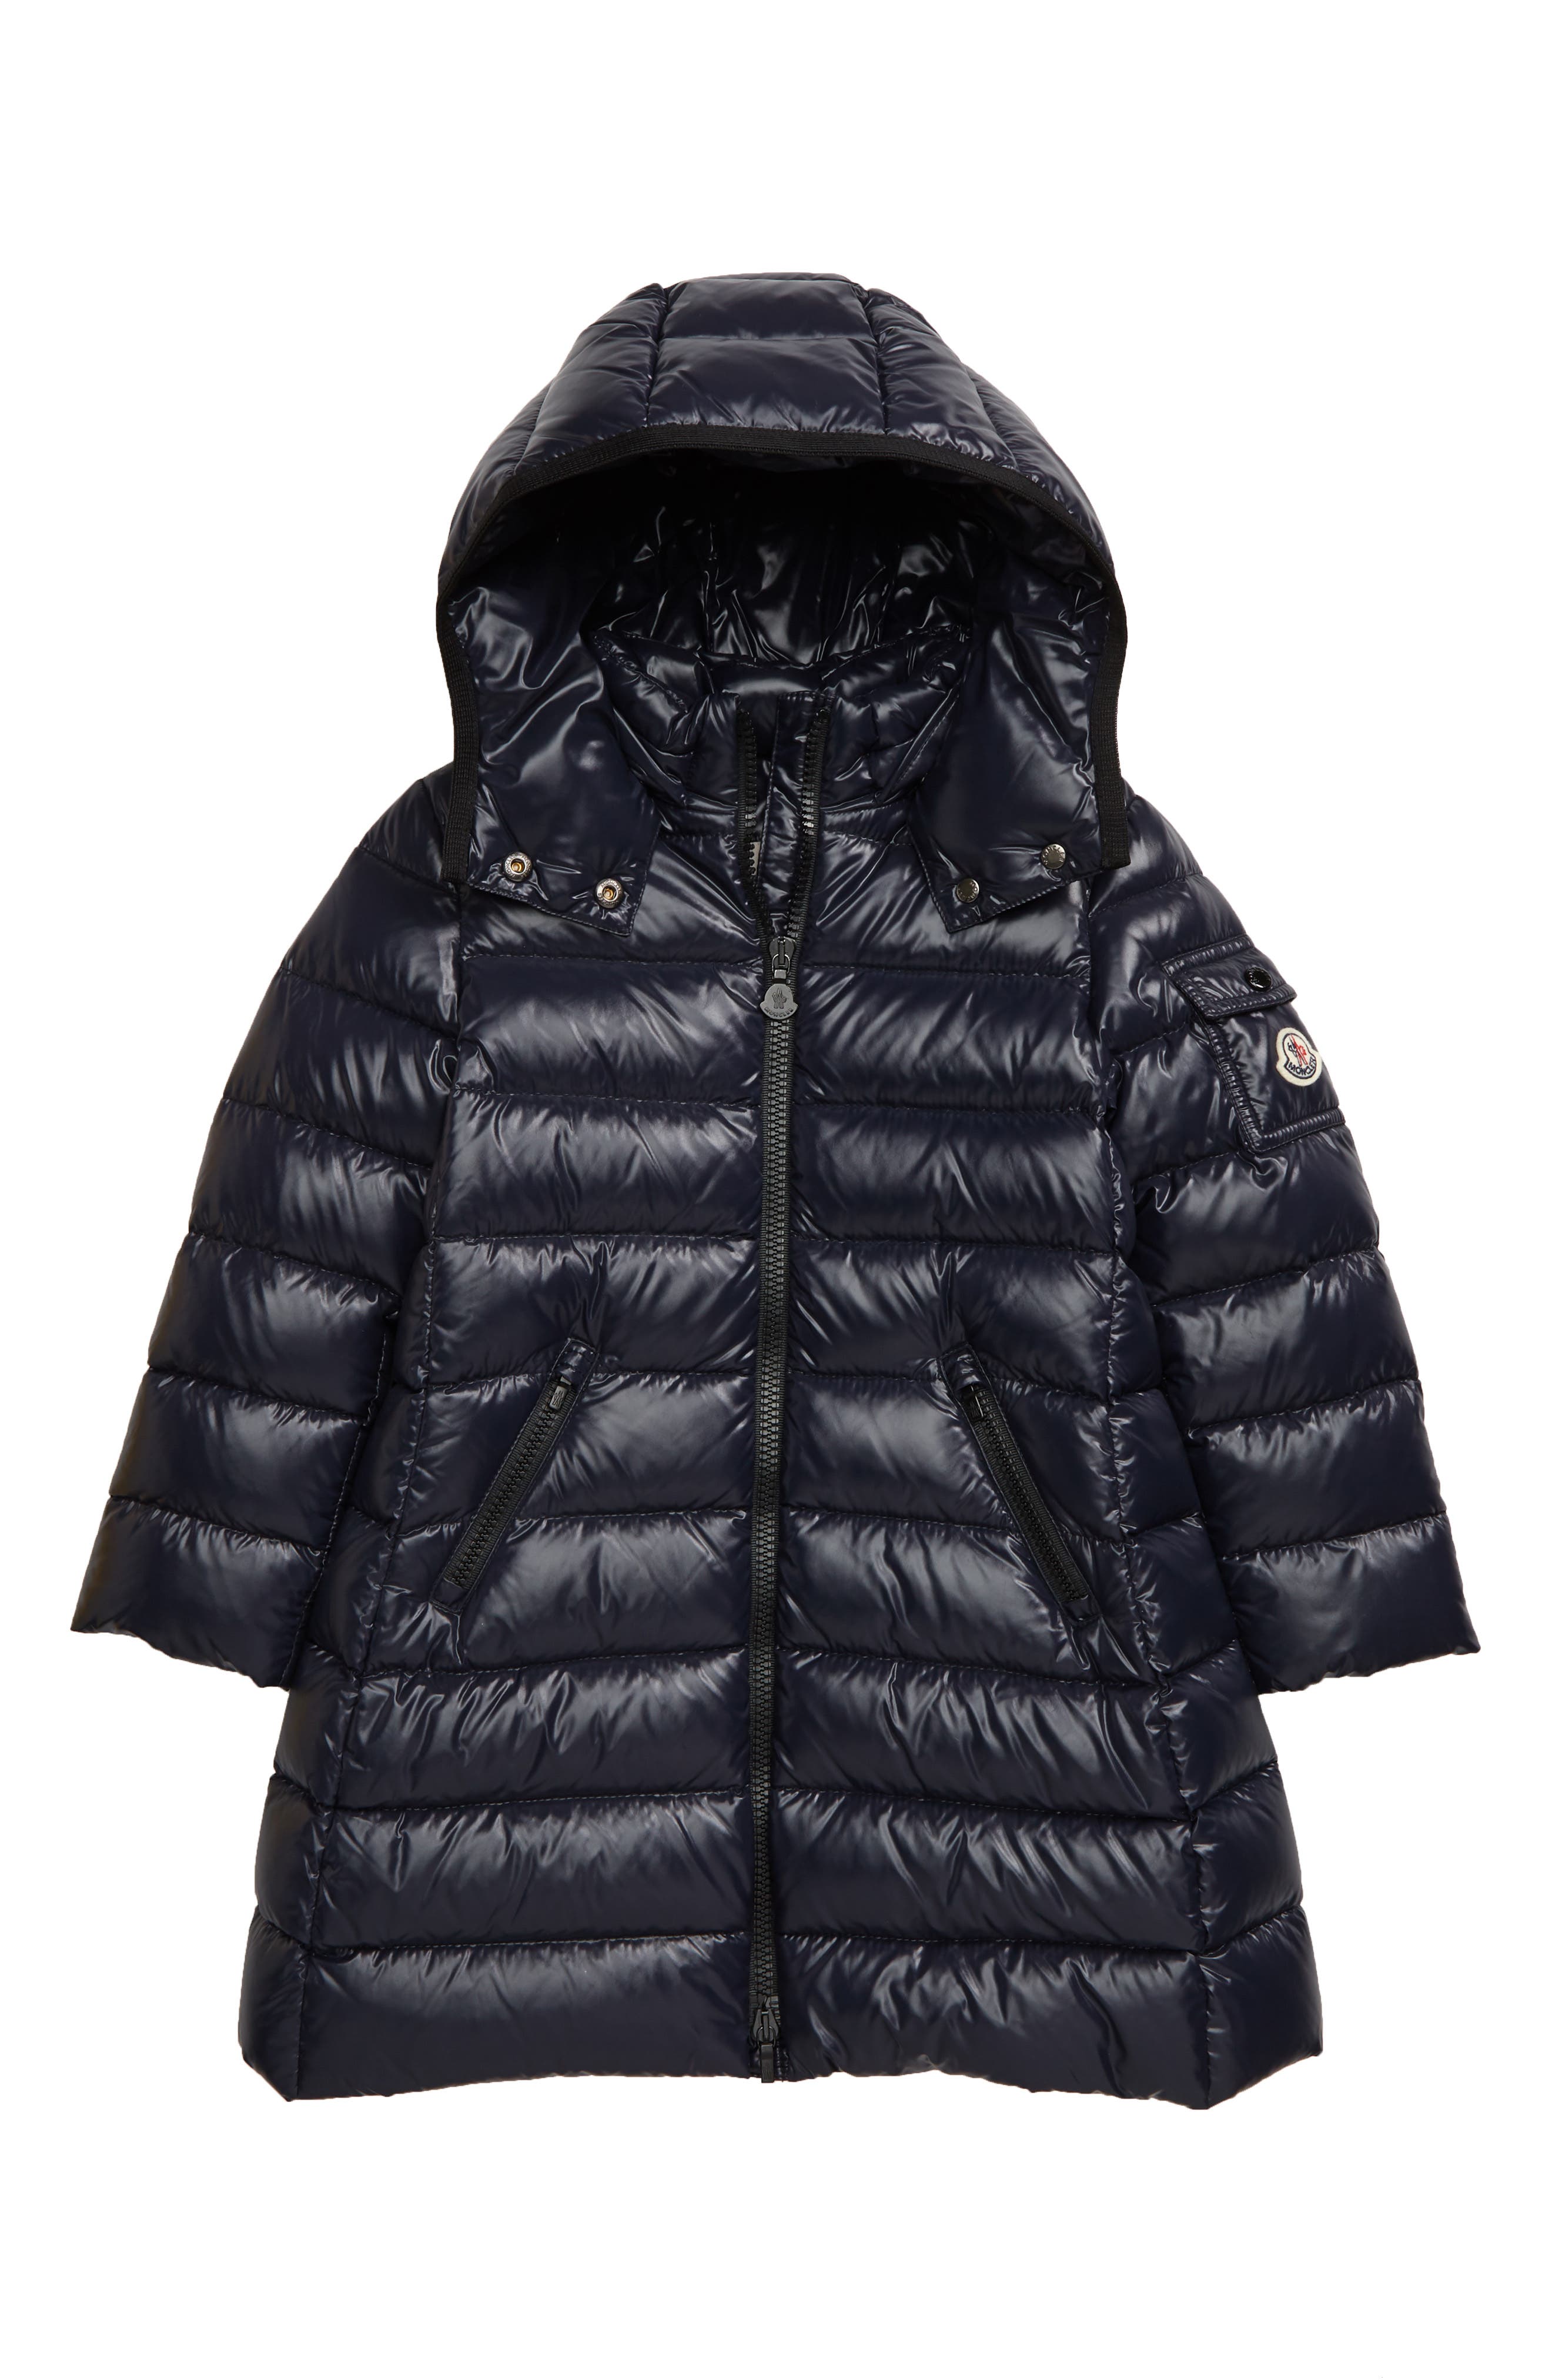 Girls' Moncler Clothing and Accessories 